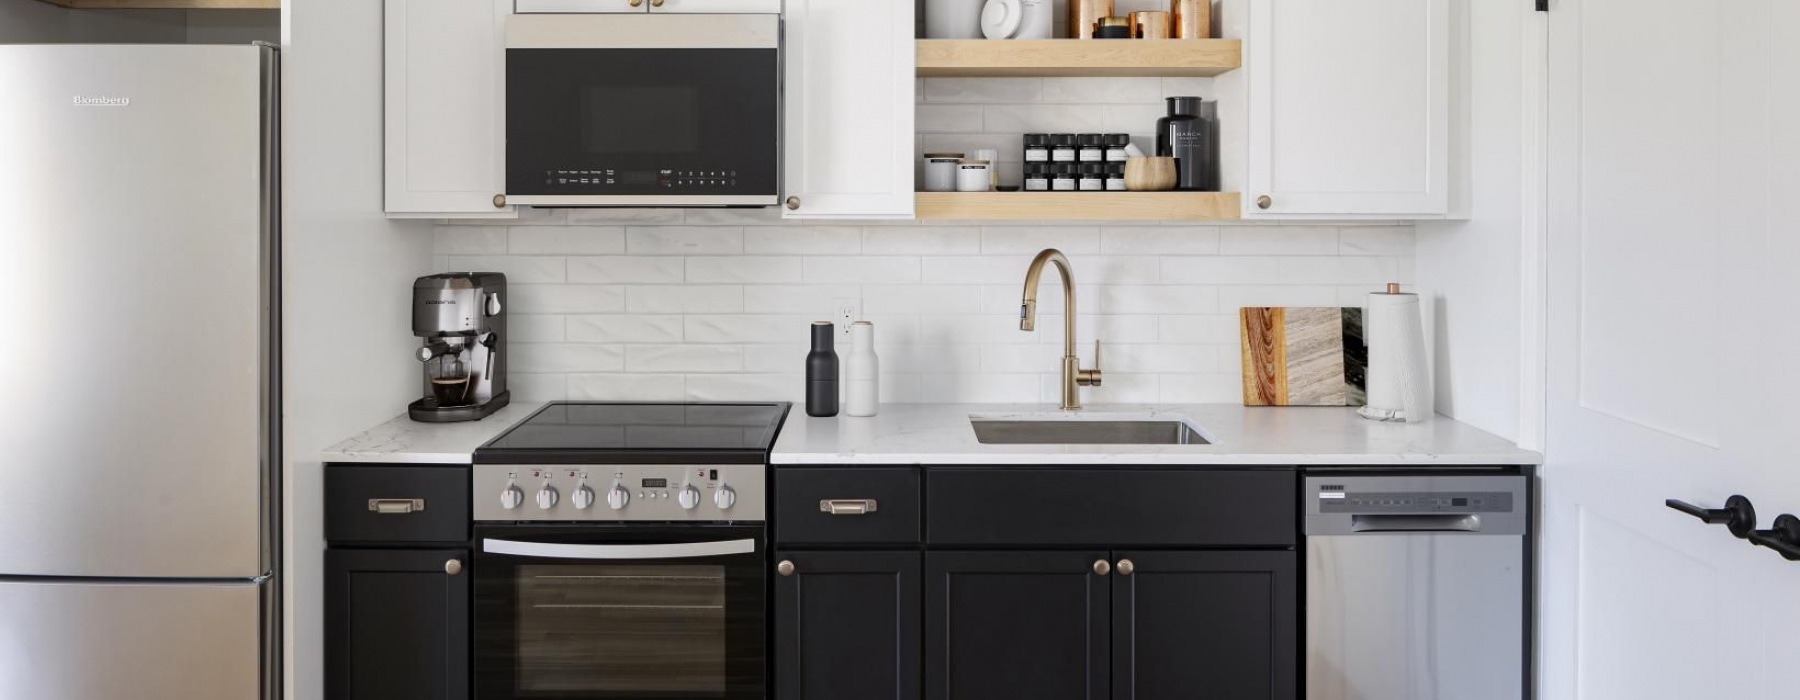 A modern kitchen featuring a sleek faucet and sink, a microwave built into the cabinets, and a coffee maker on the countertop. 